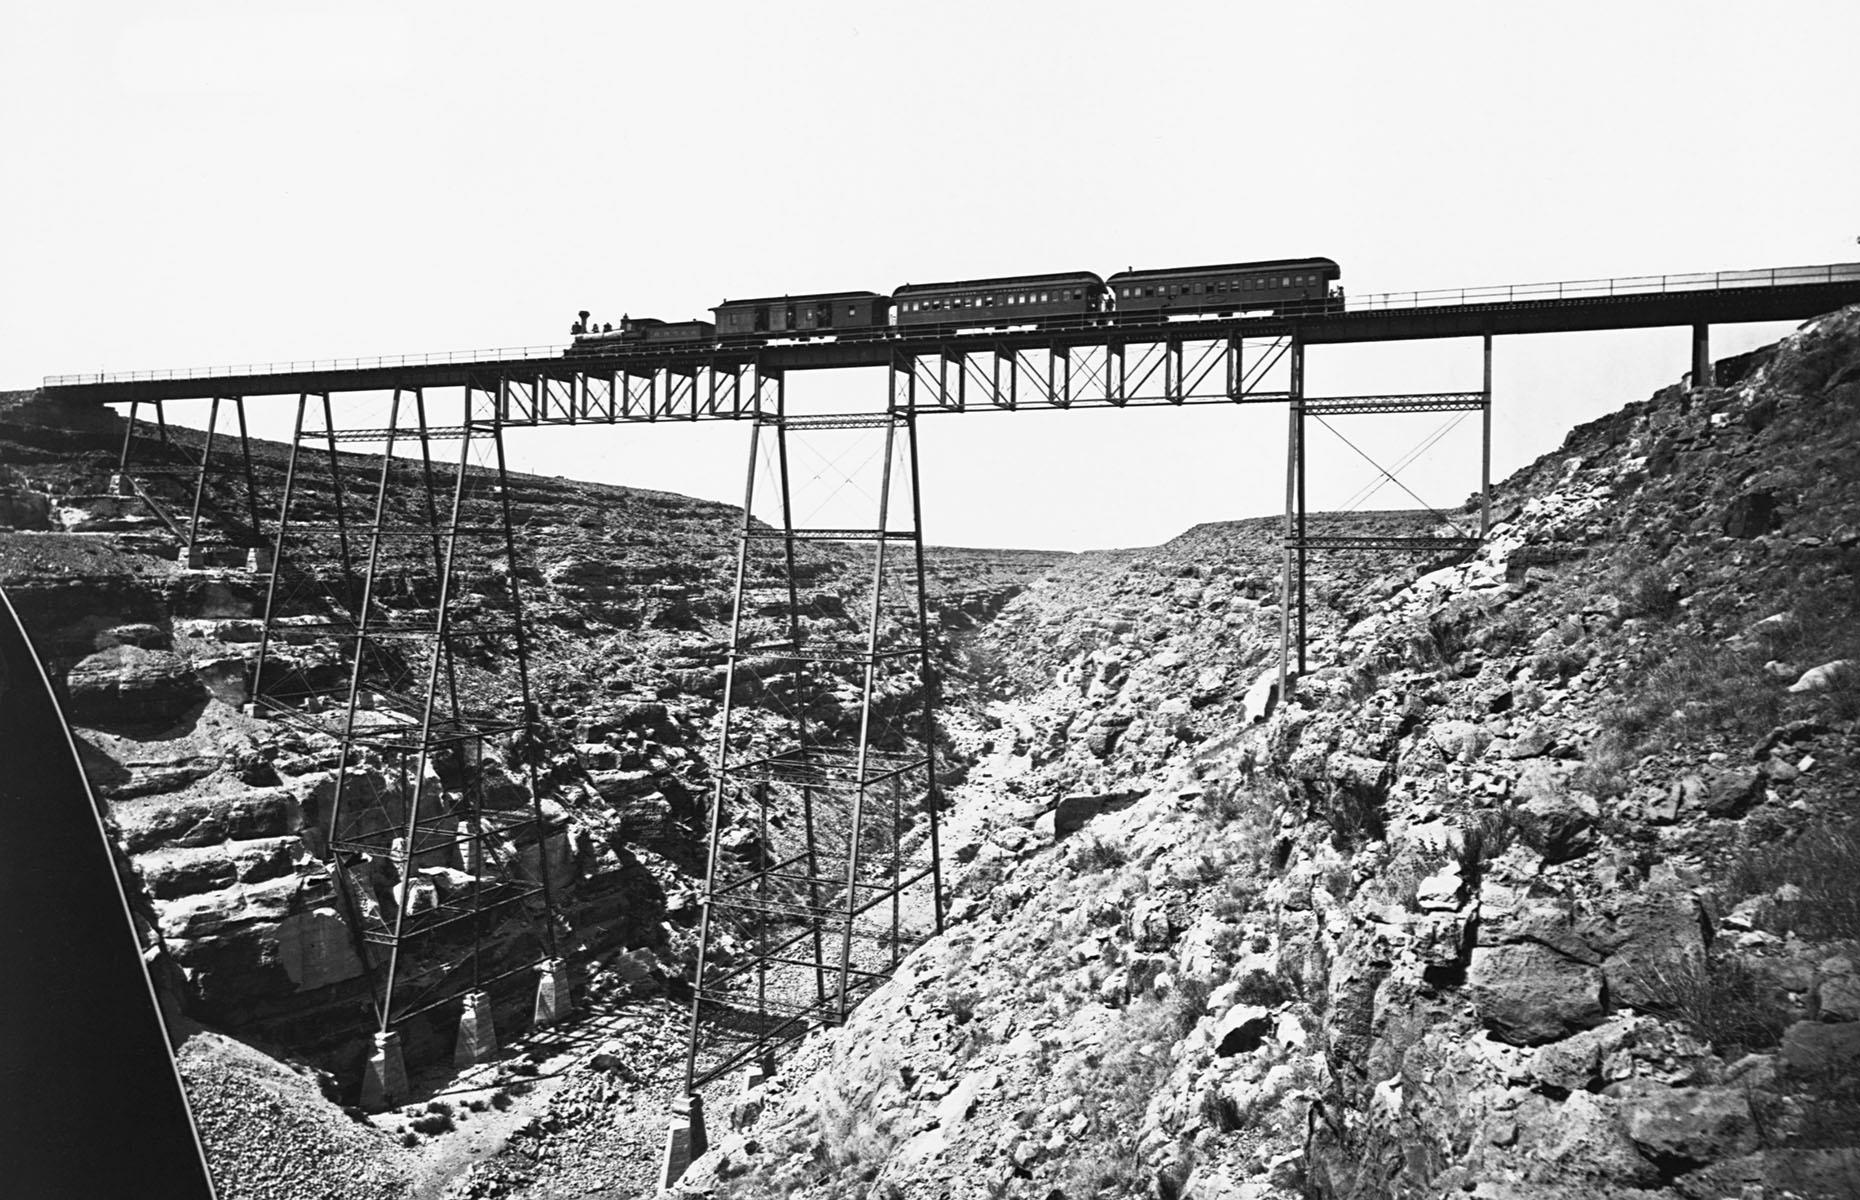 One of the biggest obstacles railroads faced in the early days was traversing the often challenging landscapes. One such place was Canyon Diablo in Arizona – this is the earliest inception of a railroad bridge across the canyon photographed at some point in the 1870s. The current steel bridge was finished in 1903, but the foundations of the original trestle bridge can still be seen today.